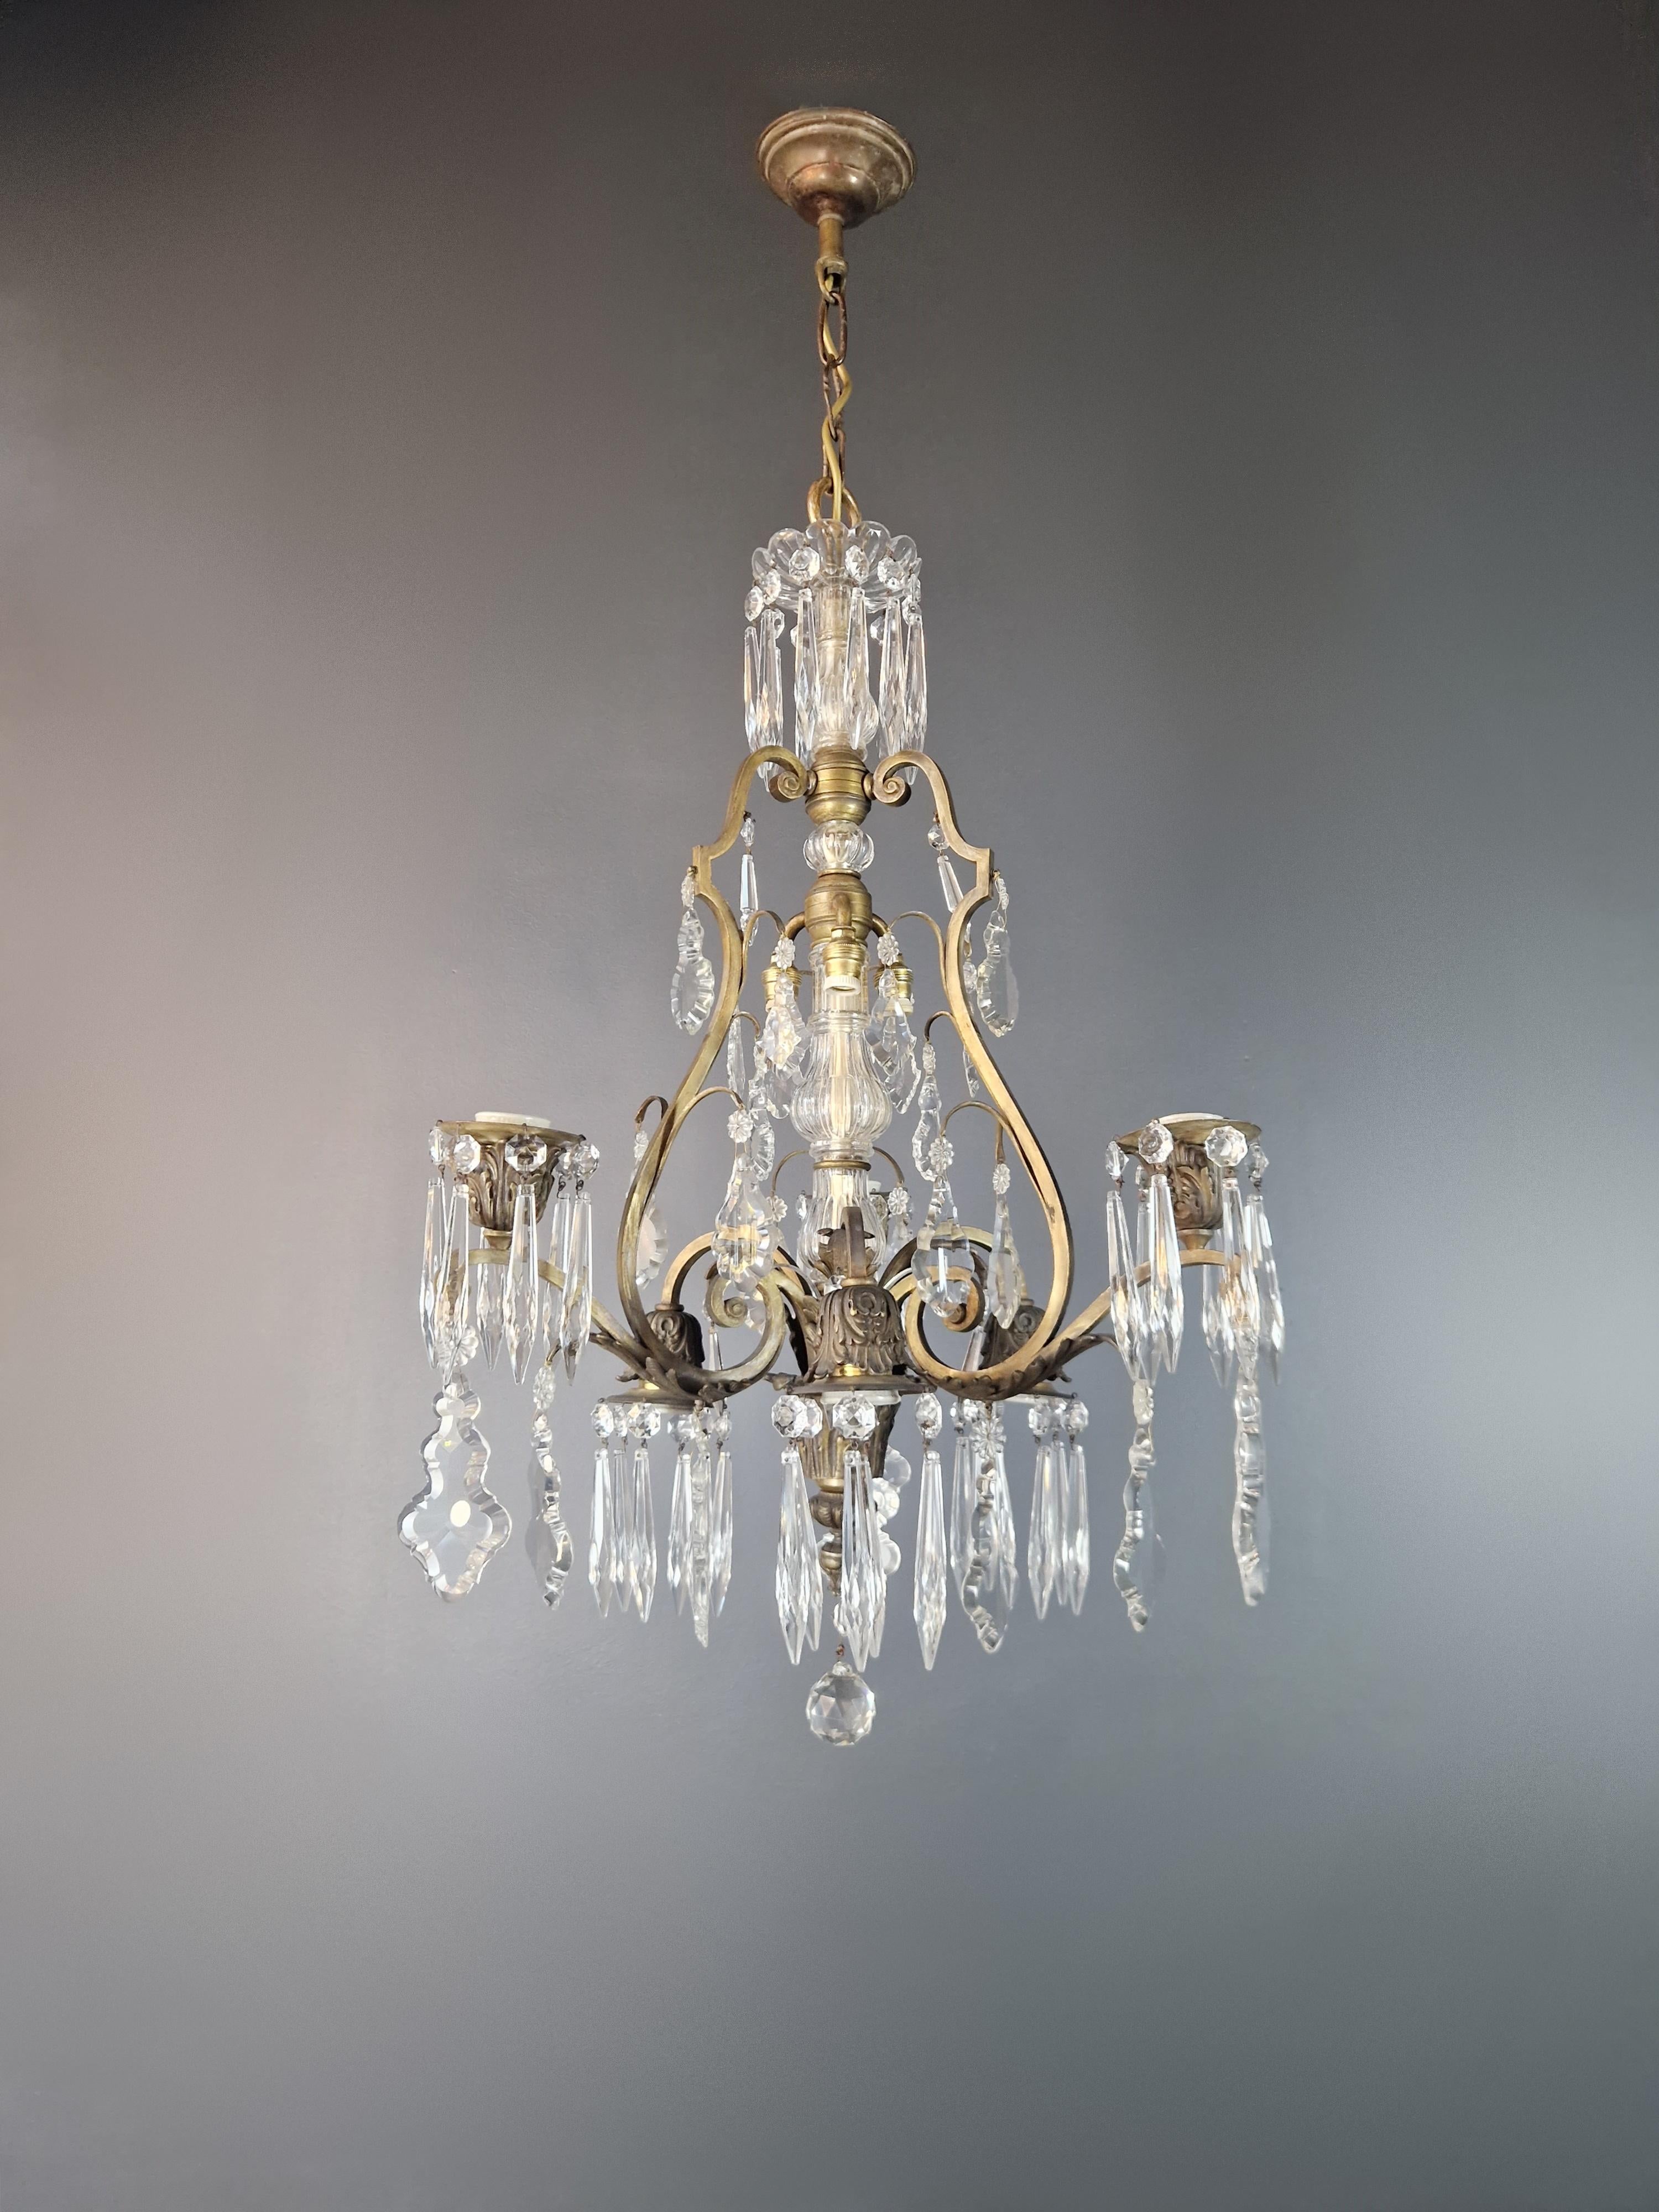 Brass Crystal Chandelier Antique Ceiling Lamp Lustre Art Nouveau and Art Deco In Good Condition For Sale In Berlin, DE